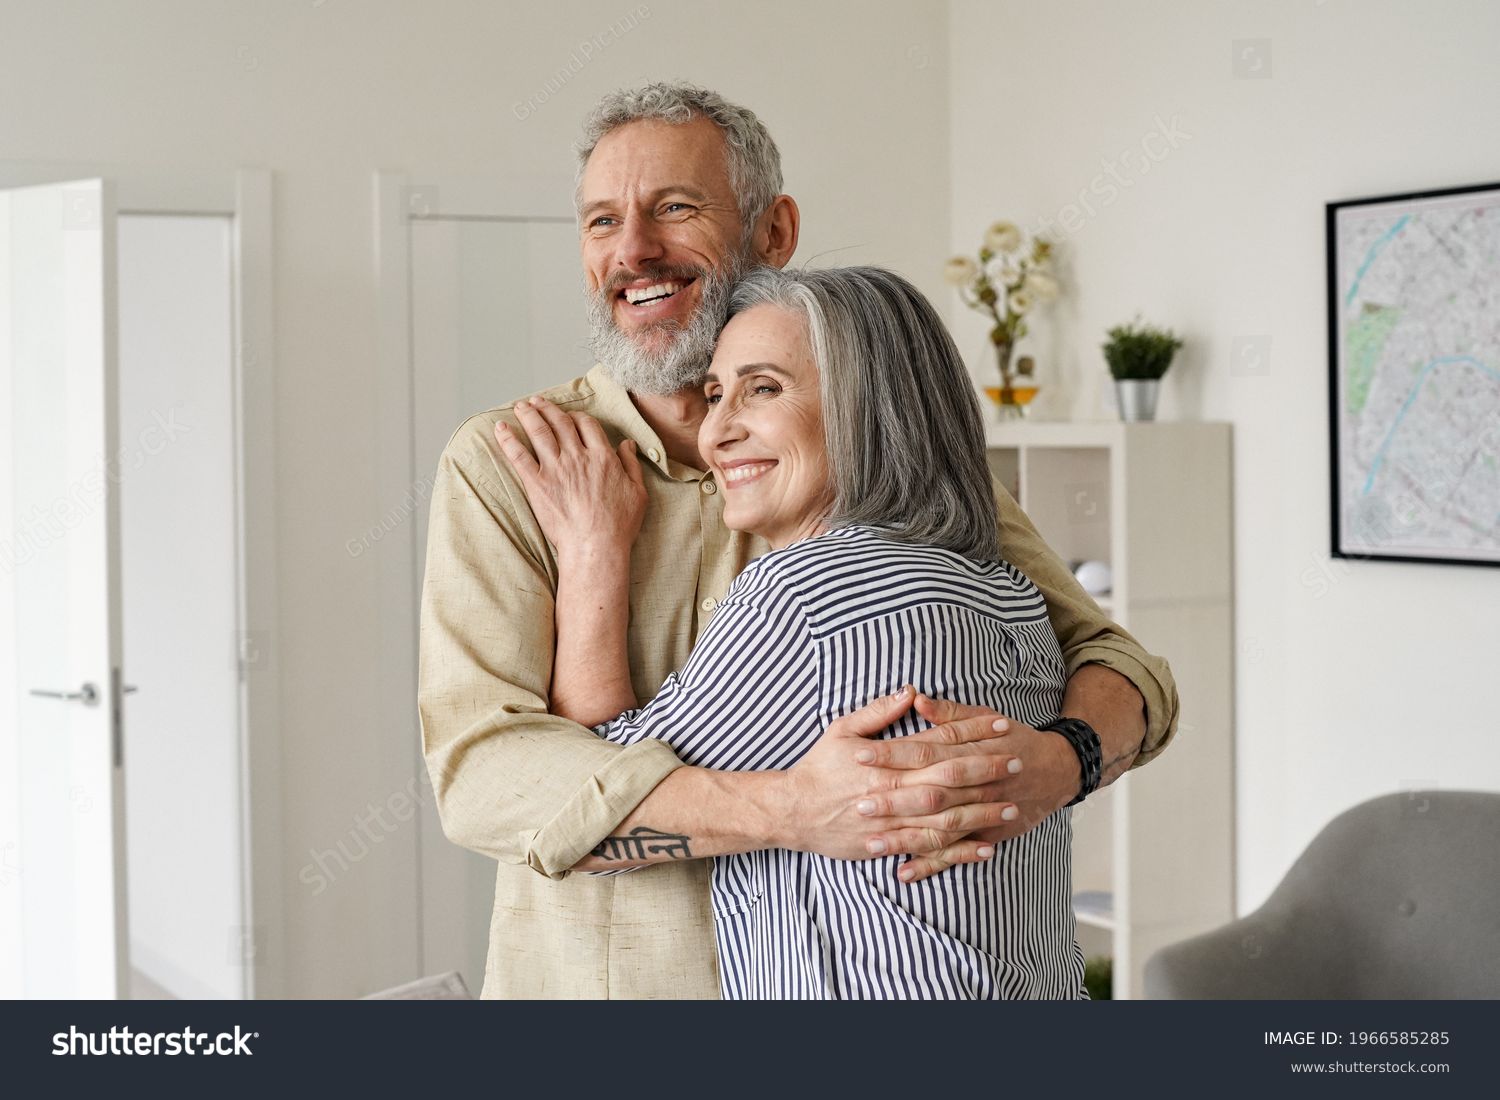 Happy senior adult mature classy couple hugging, bonding, thinking of good future. Carefree cheerful mid age old husband embracing wife looking away dreaming, enjoying wellbeing and love in new house. #1966585285